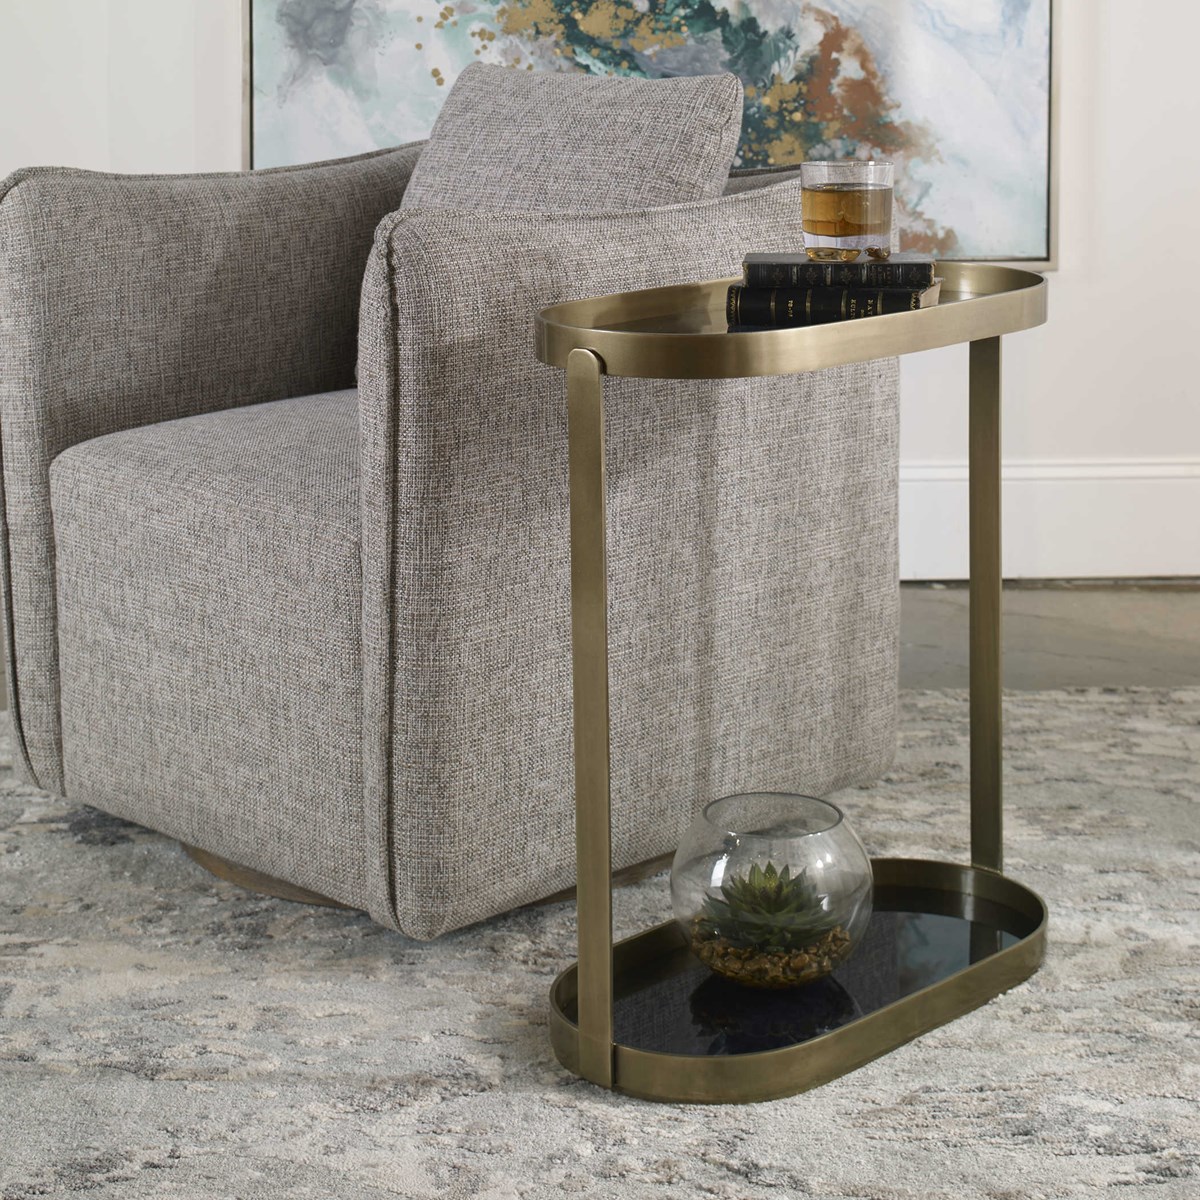 Picture of 212 Main 25081 Adia Antique Side Table  Gold